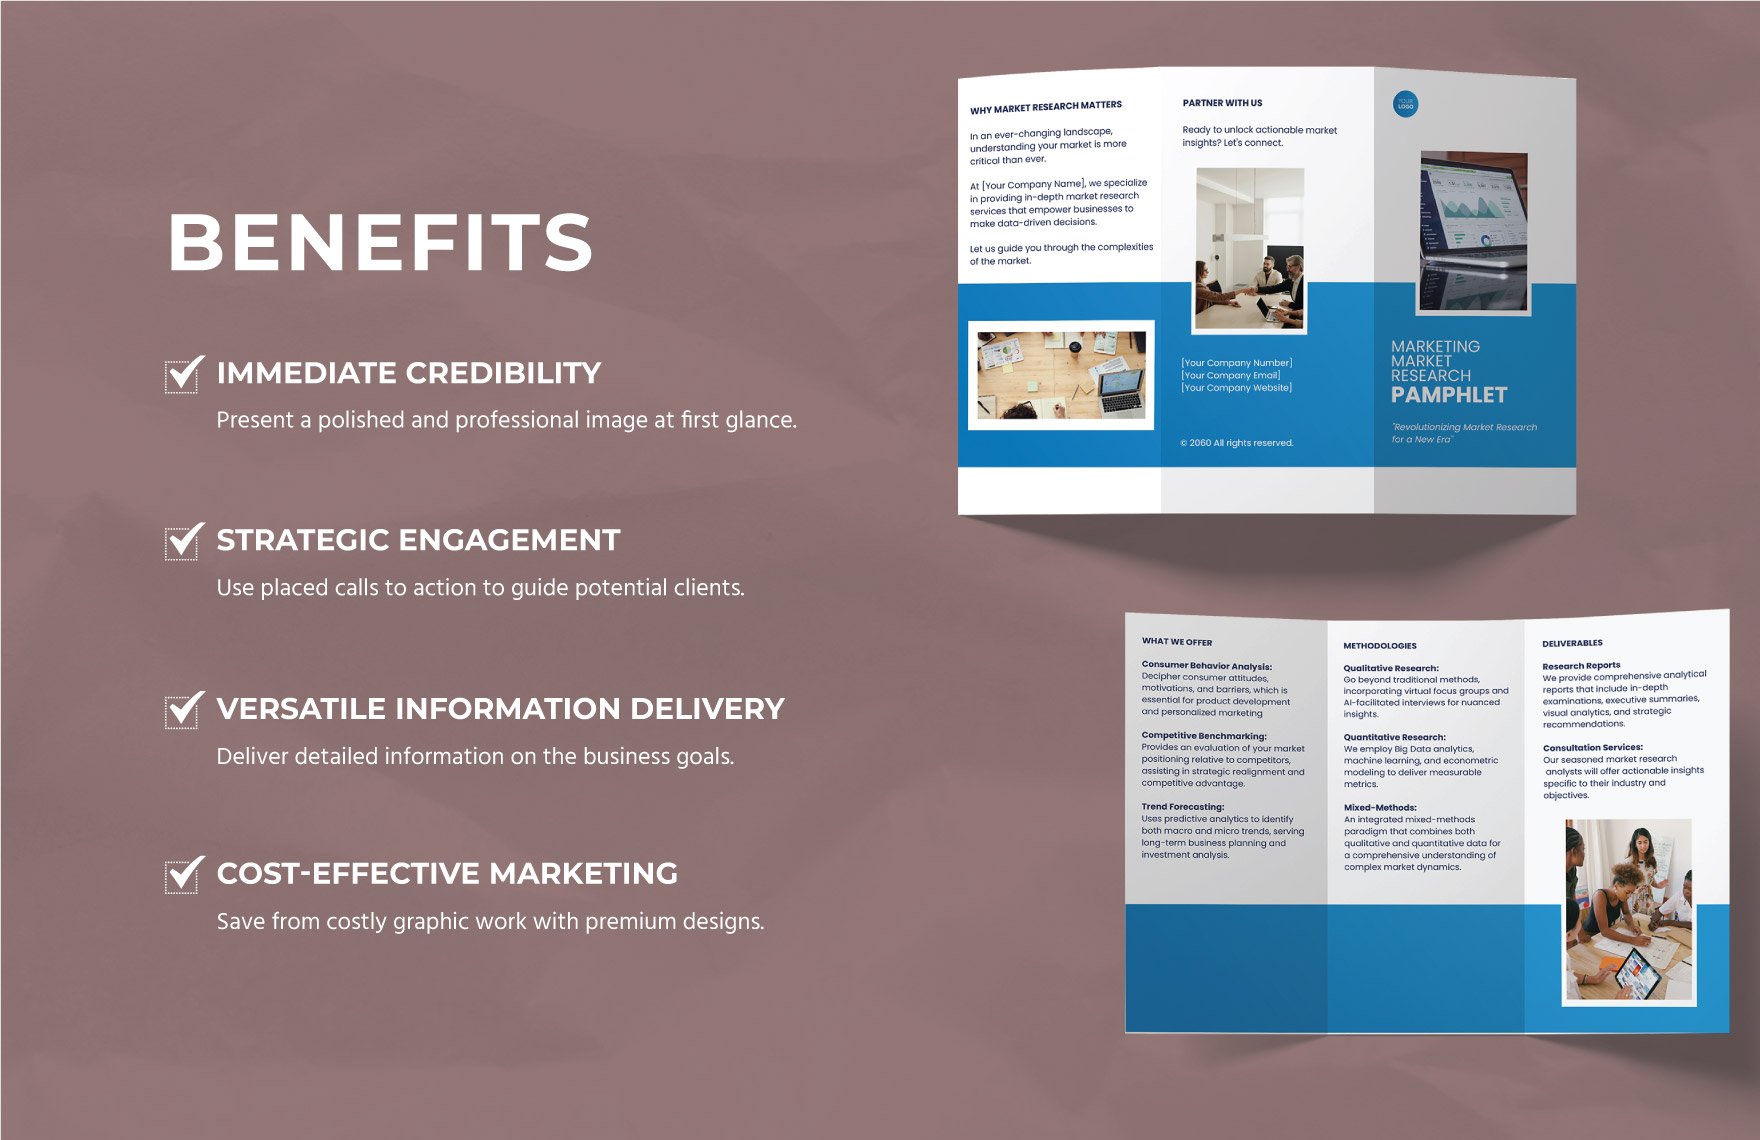 Marketing Market Research Pamphlet Template